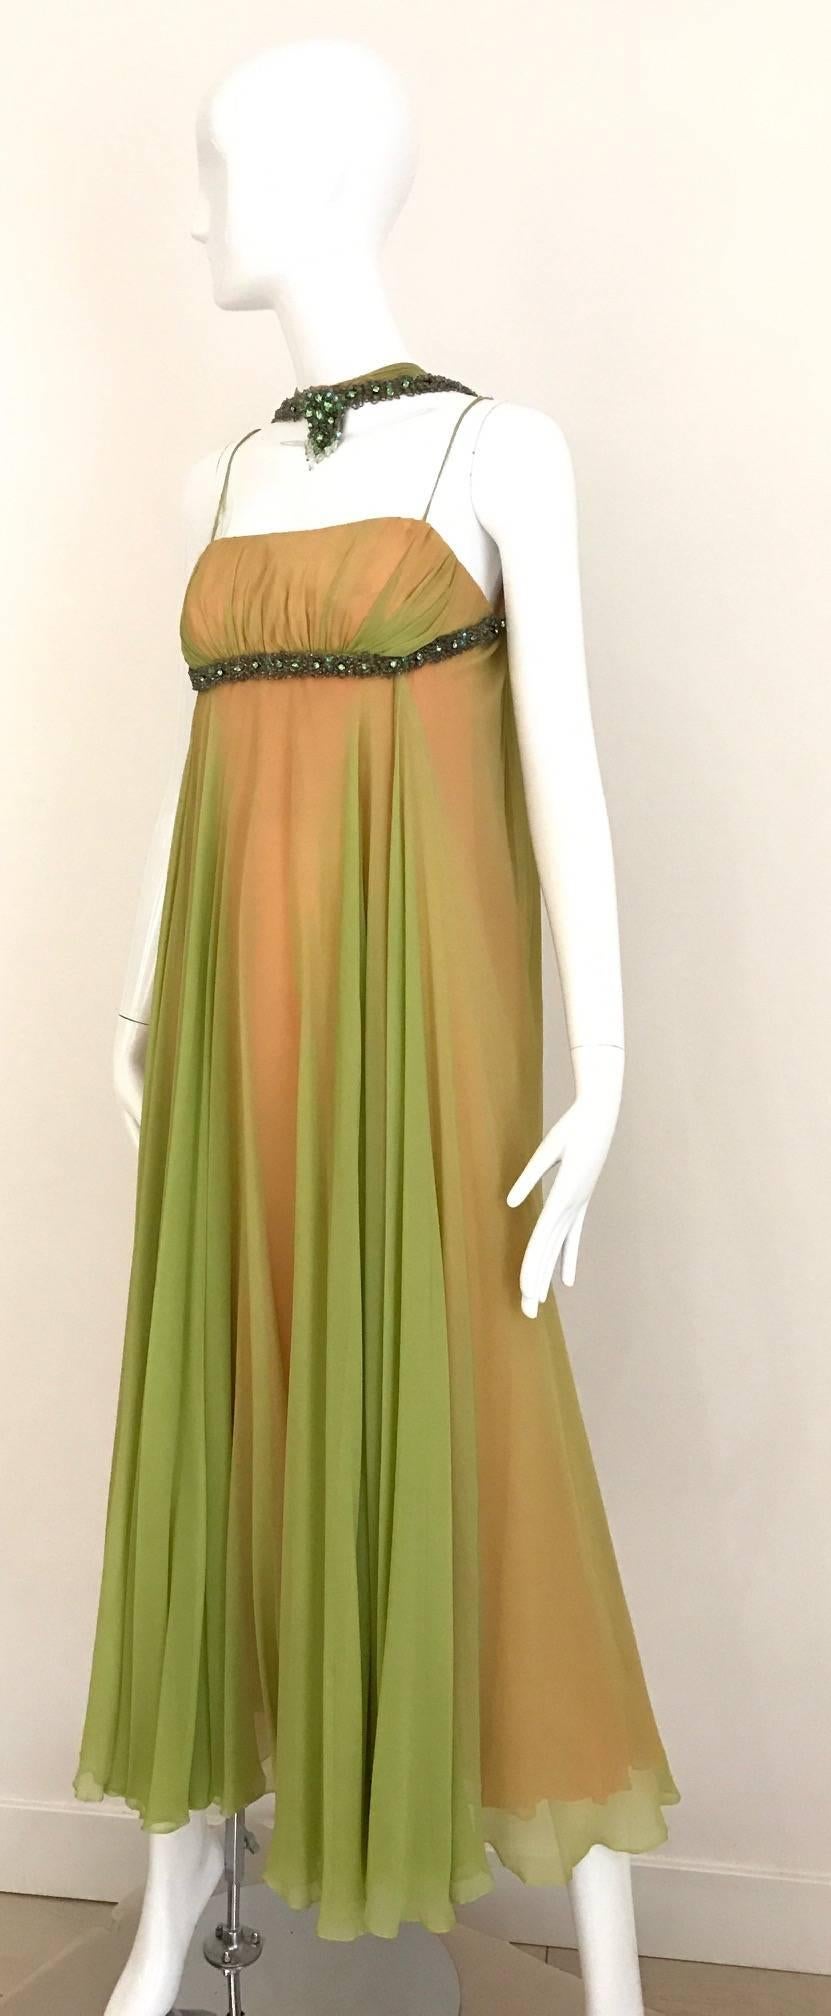 Beautiful Late 1950s and Early 1960s Silk Chiffon Gown in chartreuse  green with peach  Crepe lining. Gown has two spaghetti  straps and jeweled collar that connect from the back. Rhinestones beads underneath the bust line. 
Bust : 32 inch 
****